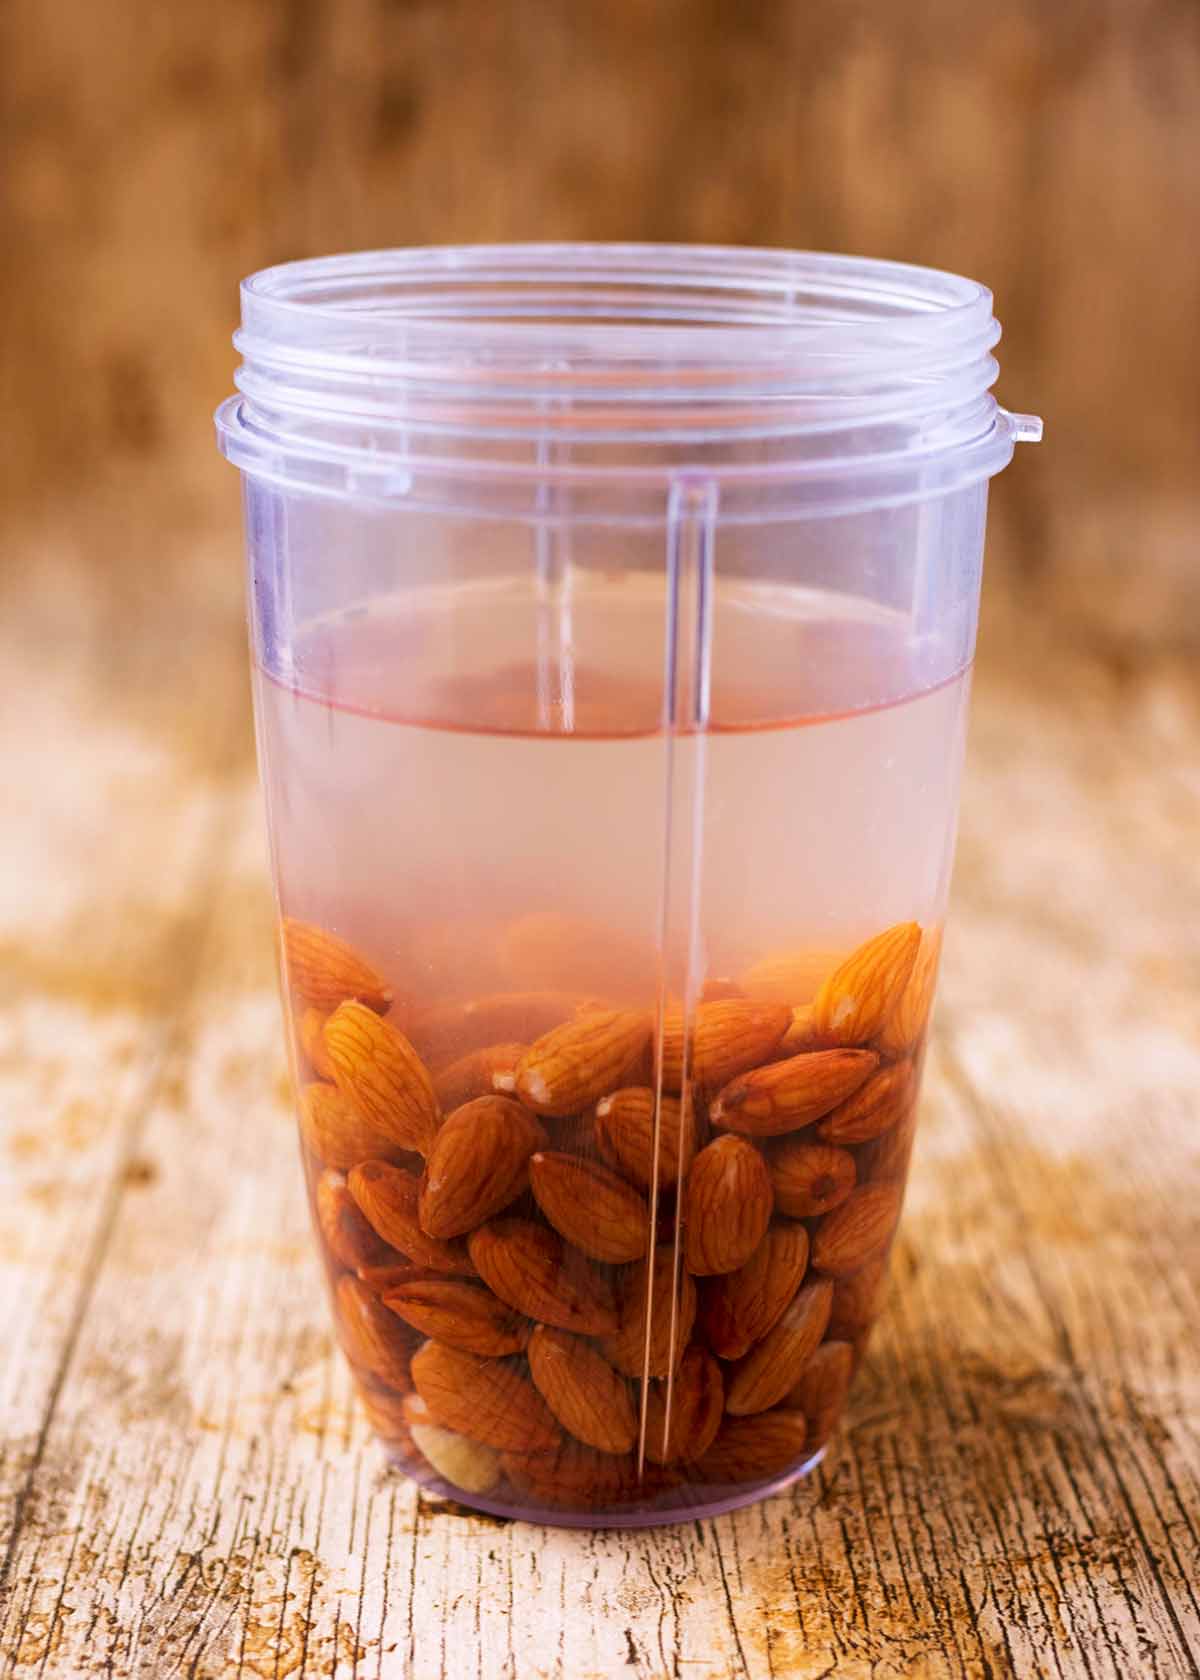 Almonds and water in a blender jug.